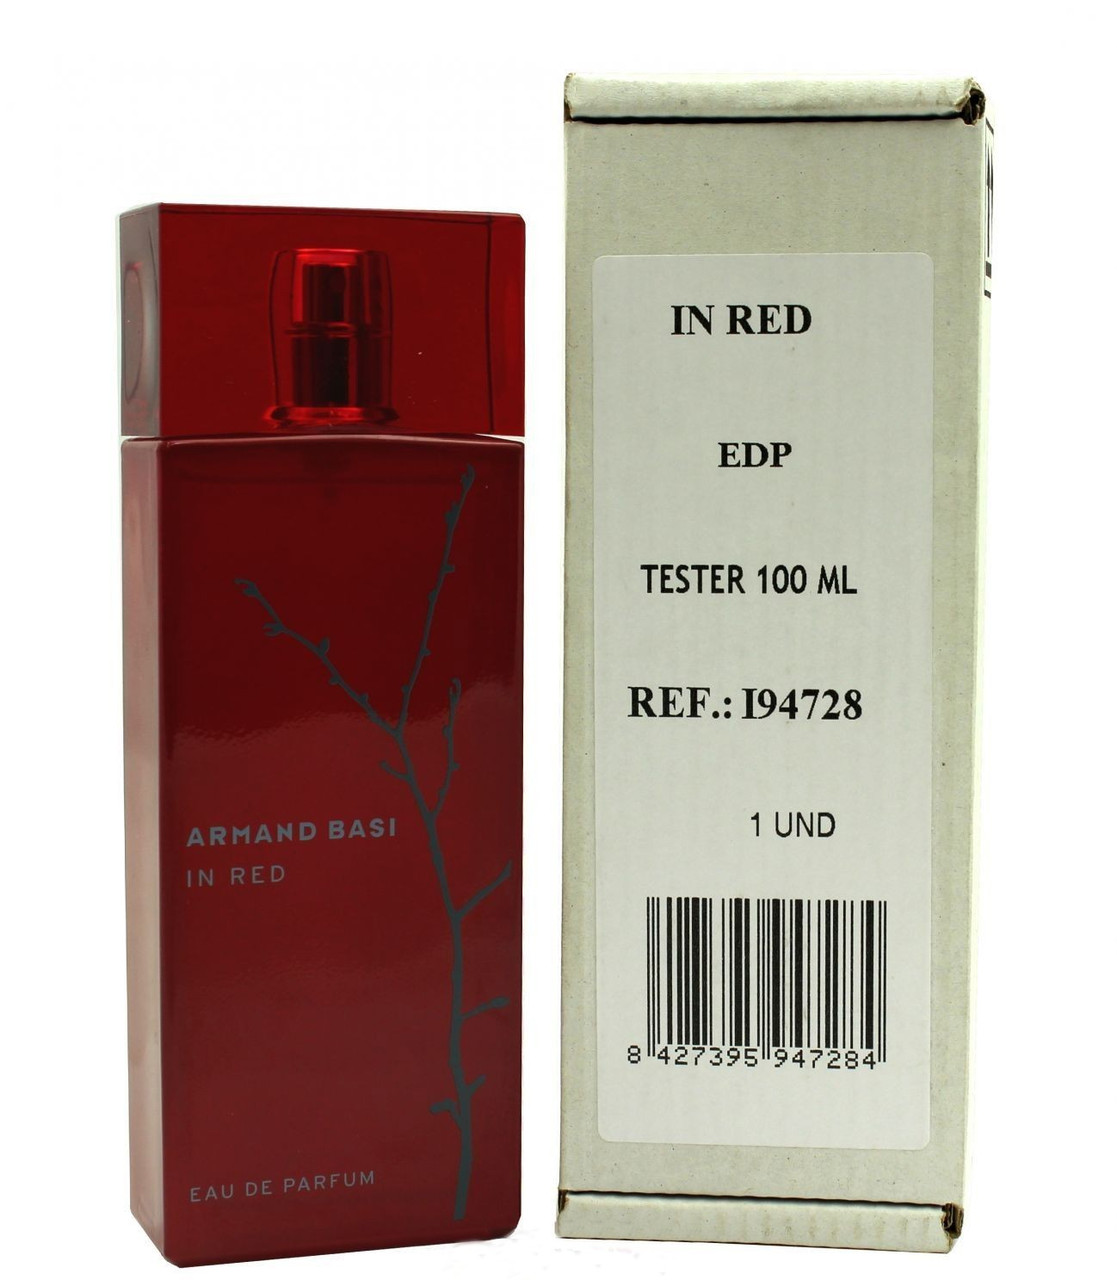 Armand Basi in red edp  TESTER